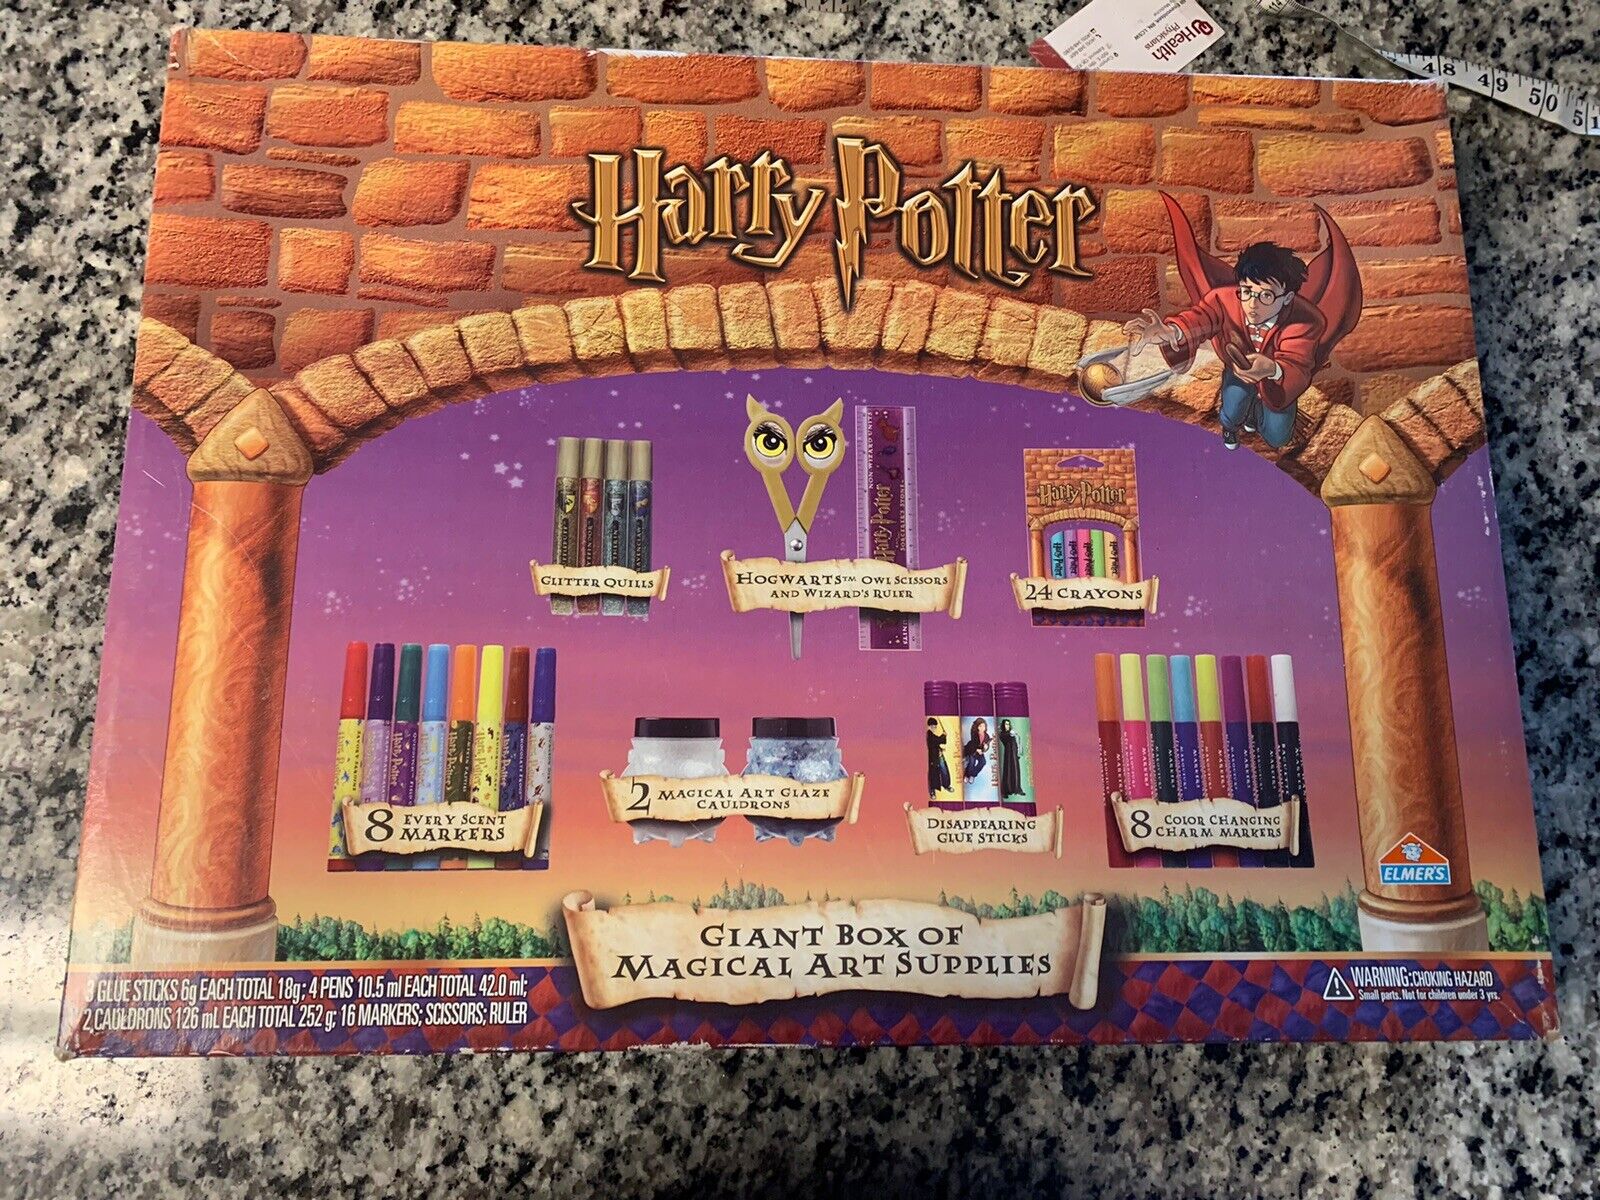 2001 Harry Potter Elmers Giant Box Of Magical Art Supplies - New In Box